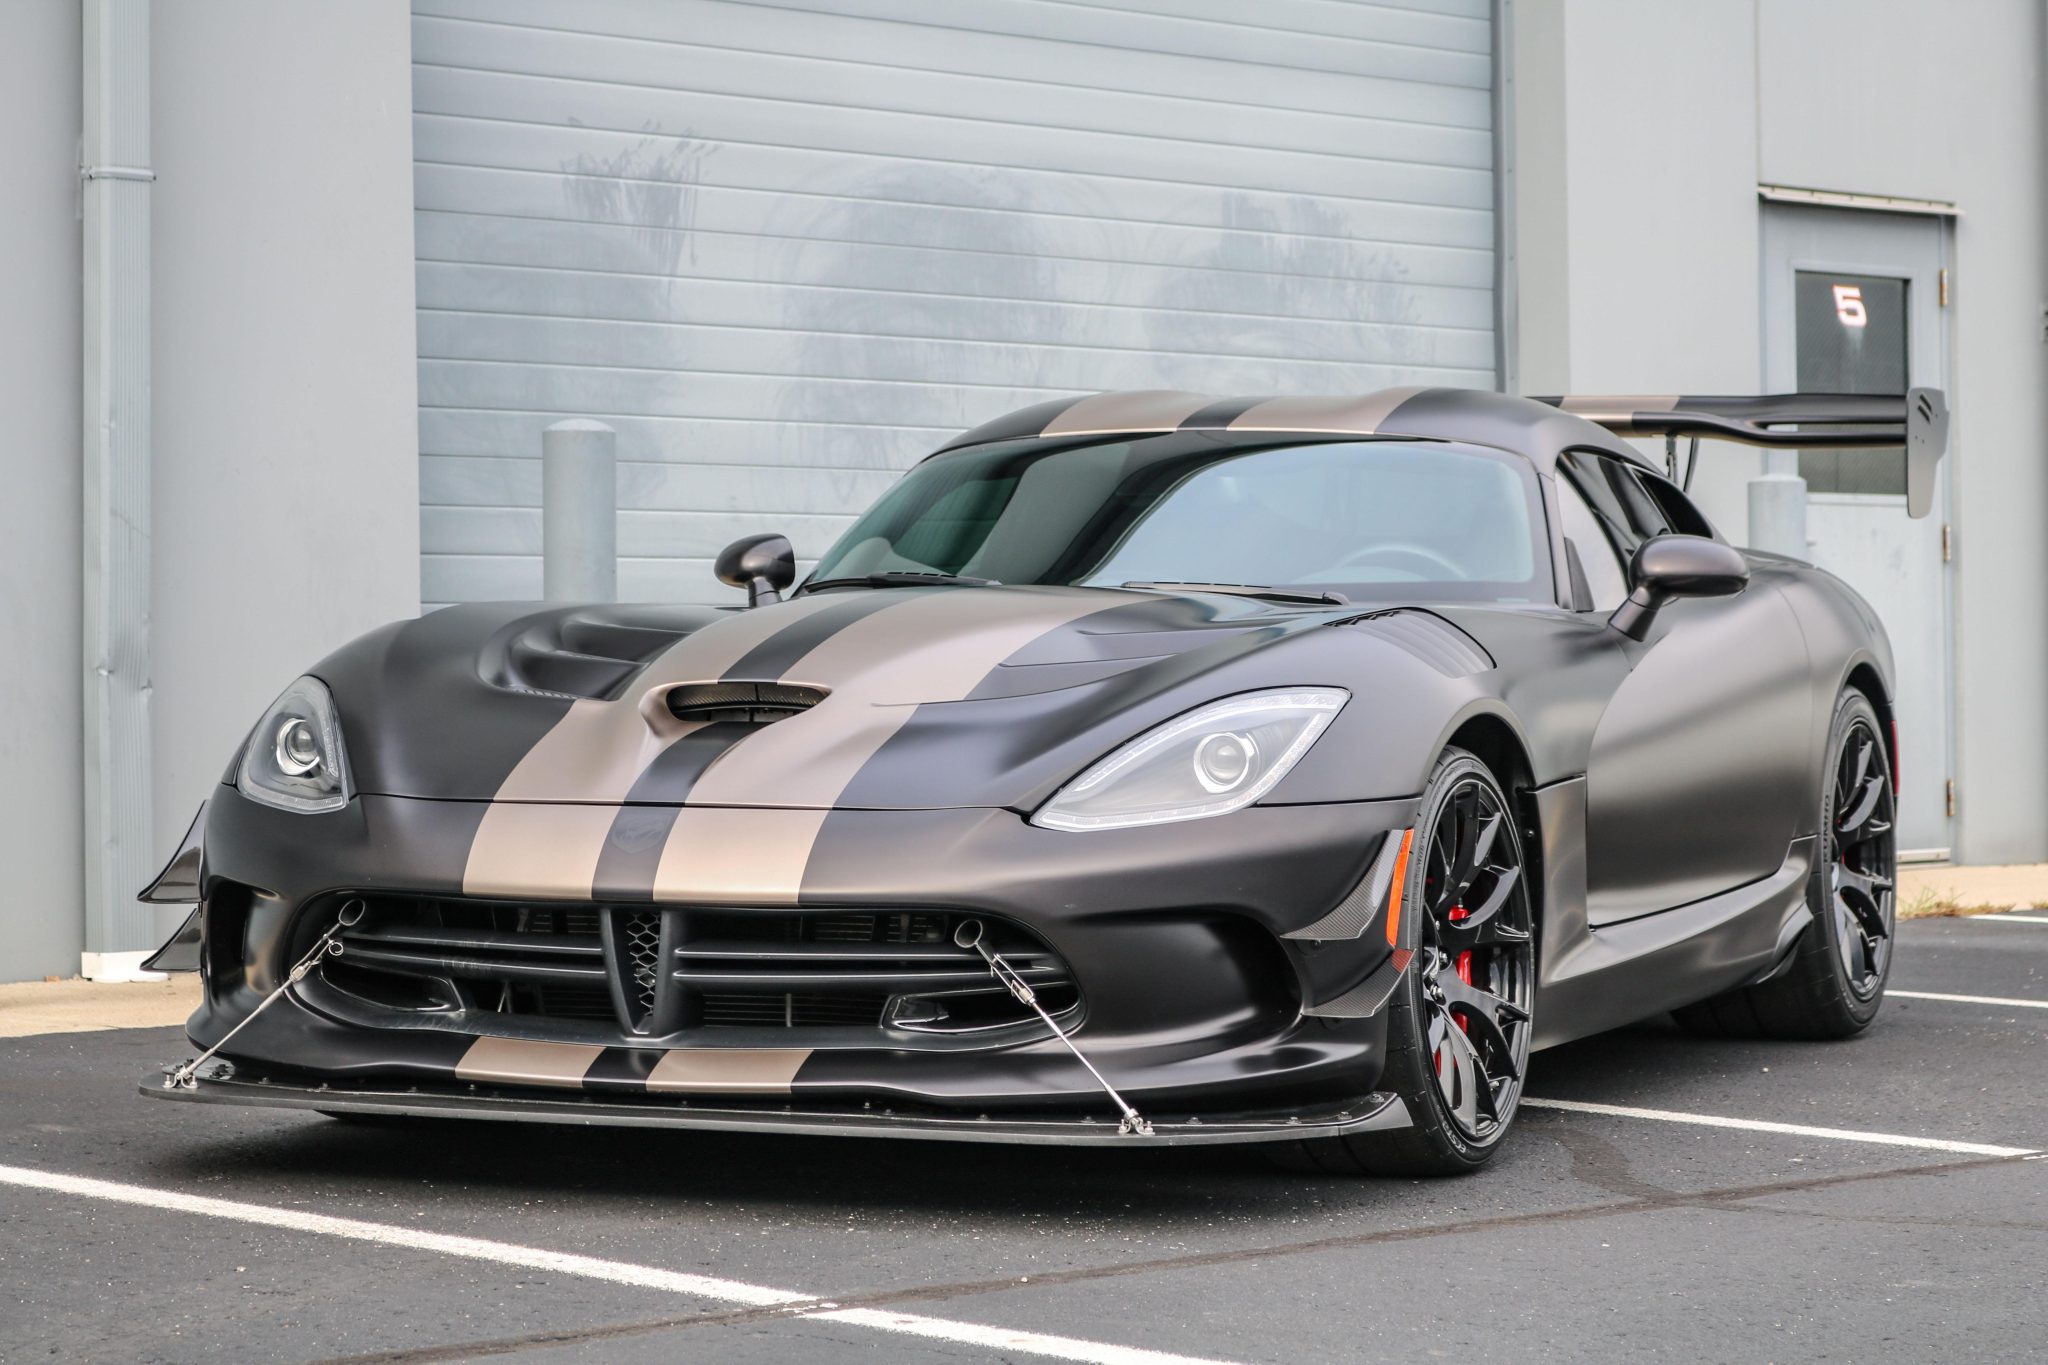 This Dodge Viper Acr Extreme Was The Very First Built For 17 Carscoops